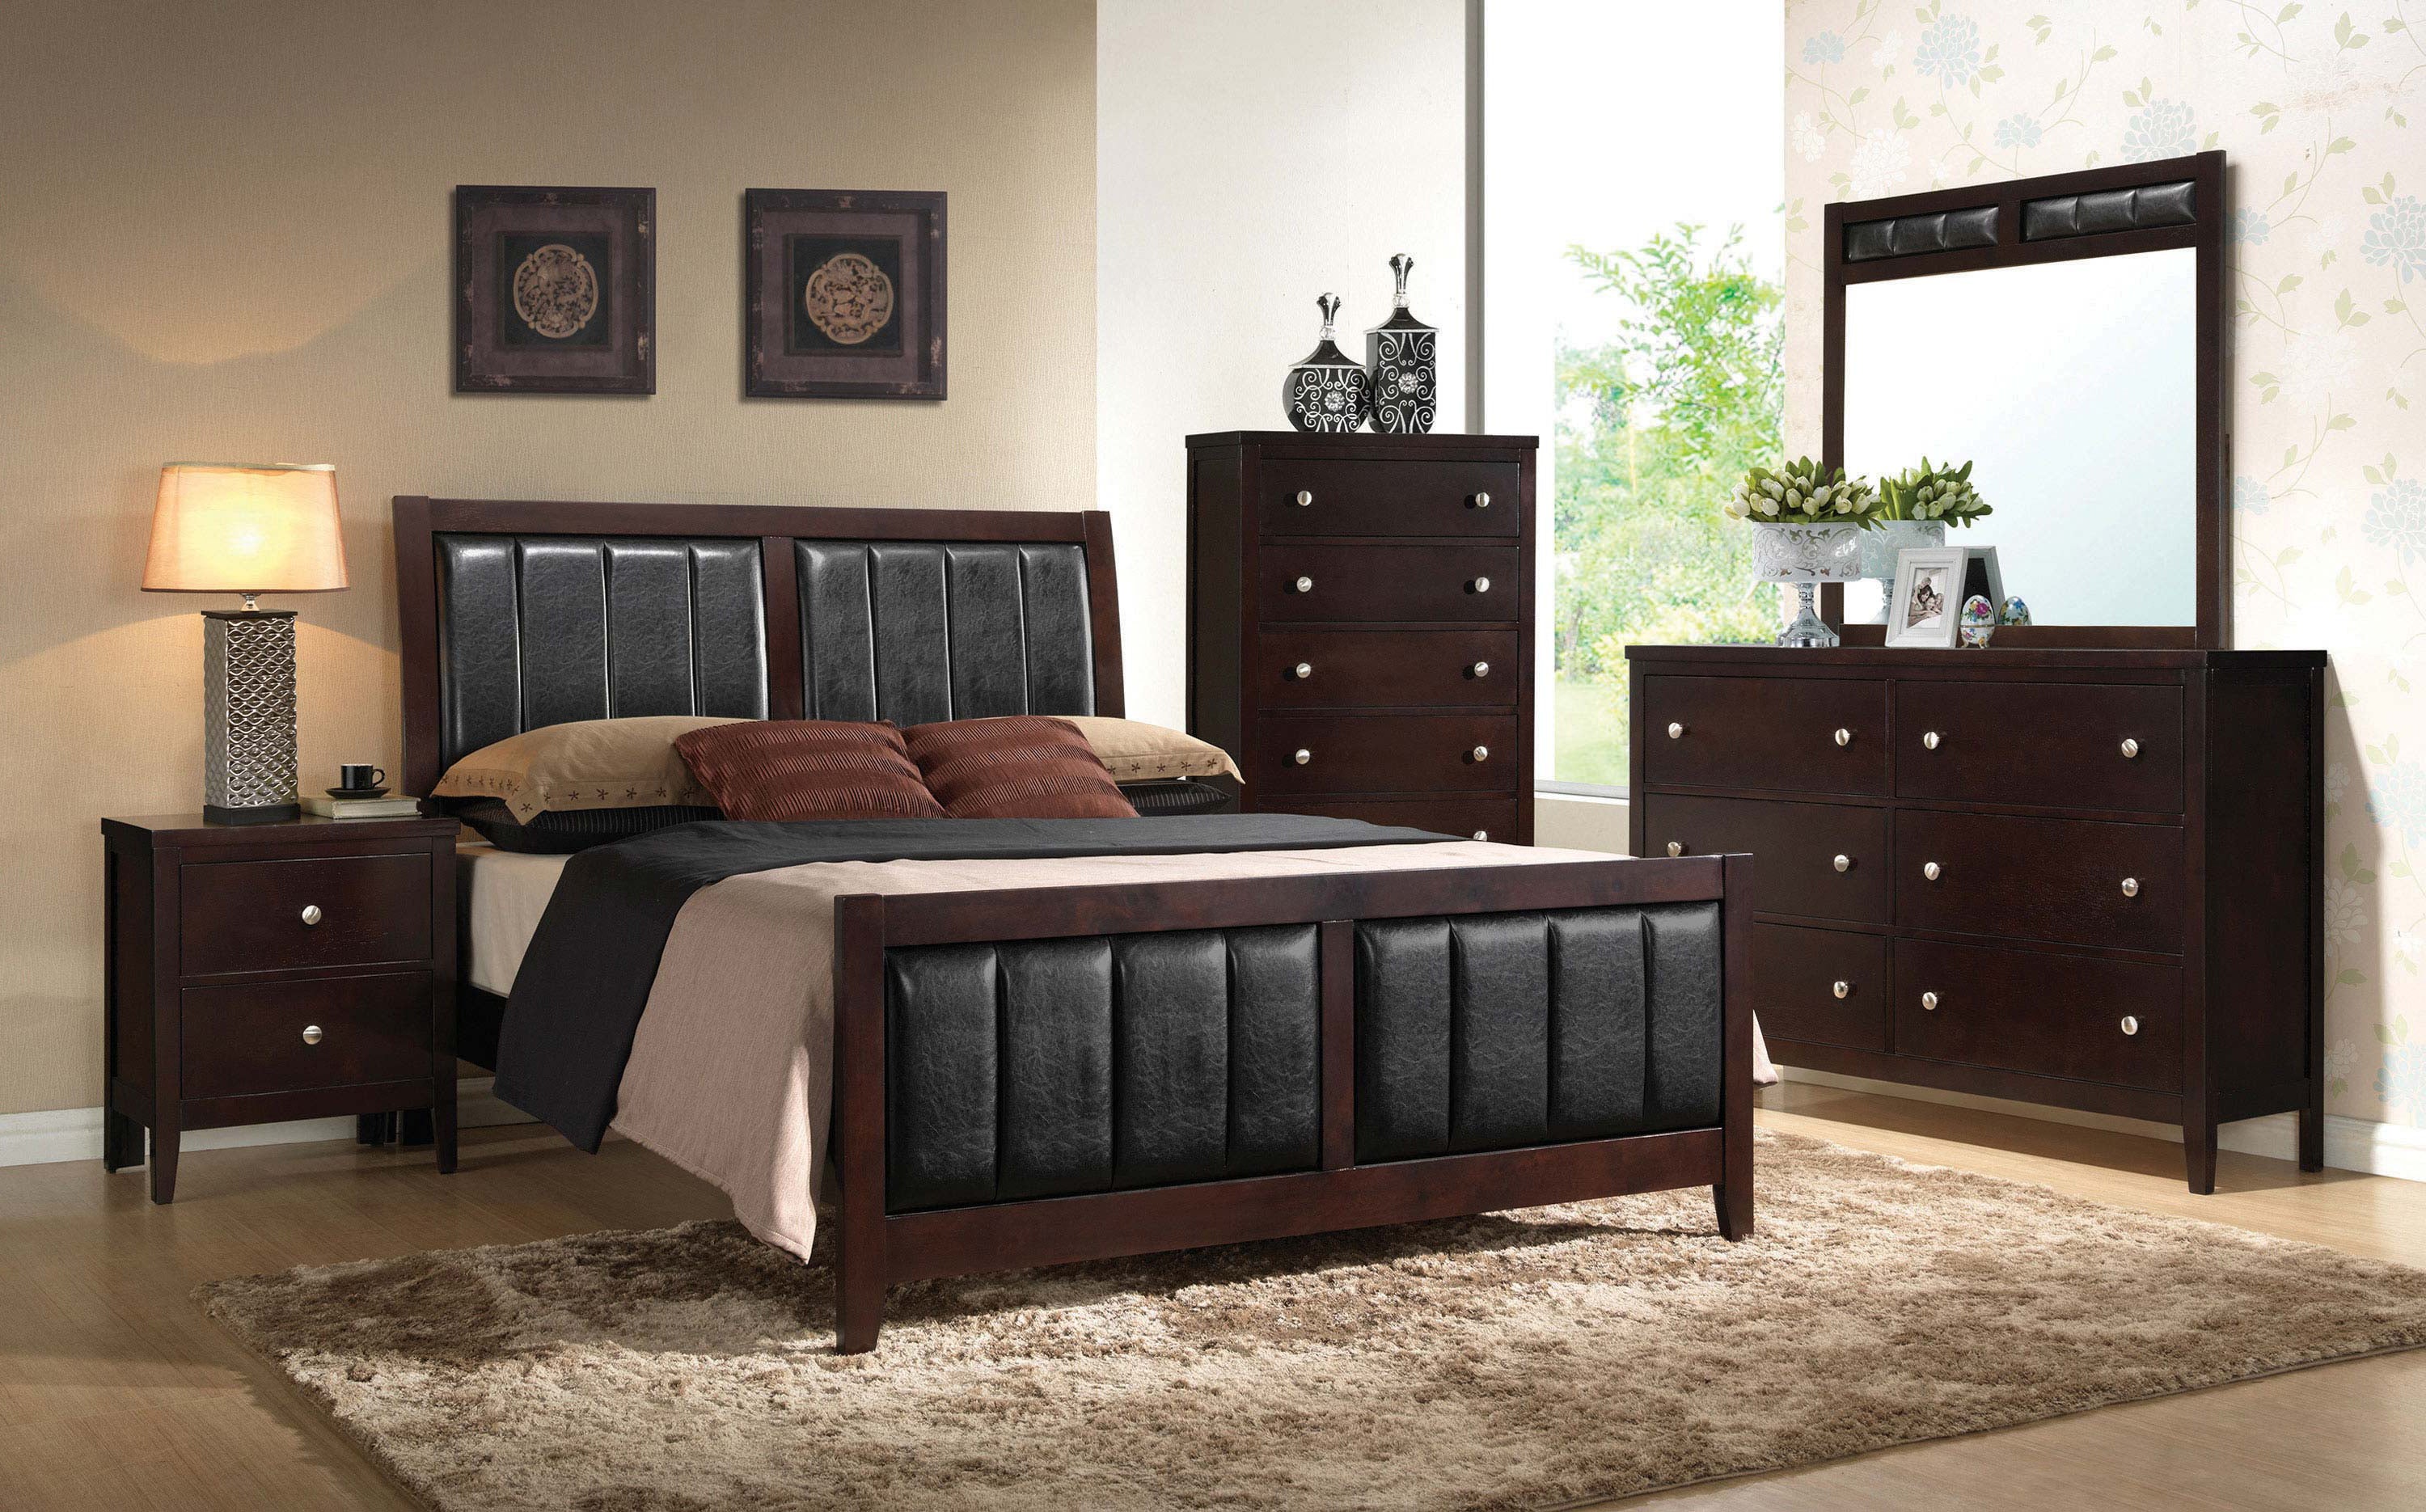 Carlton 4 PC Queen Bedroom Set with Upholstered Headboard in Cappuccino